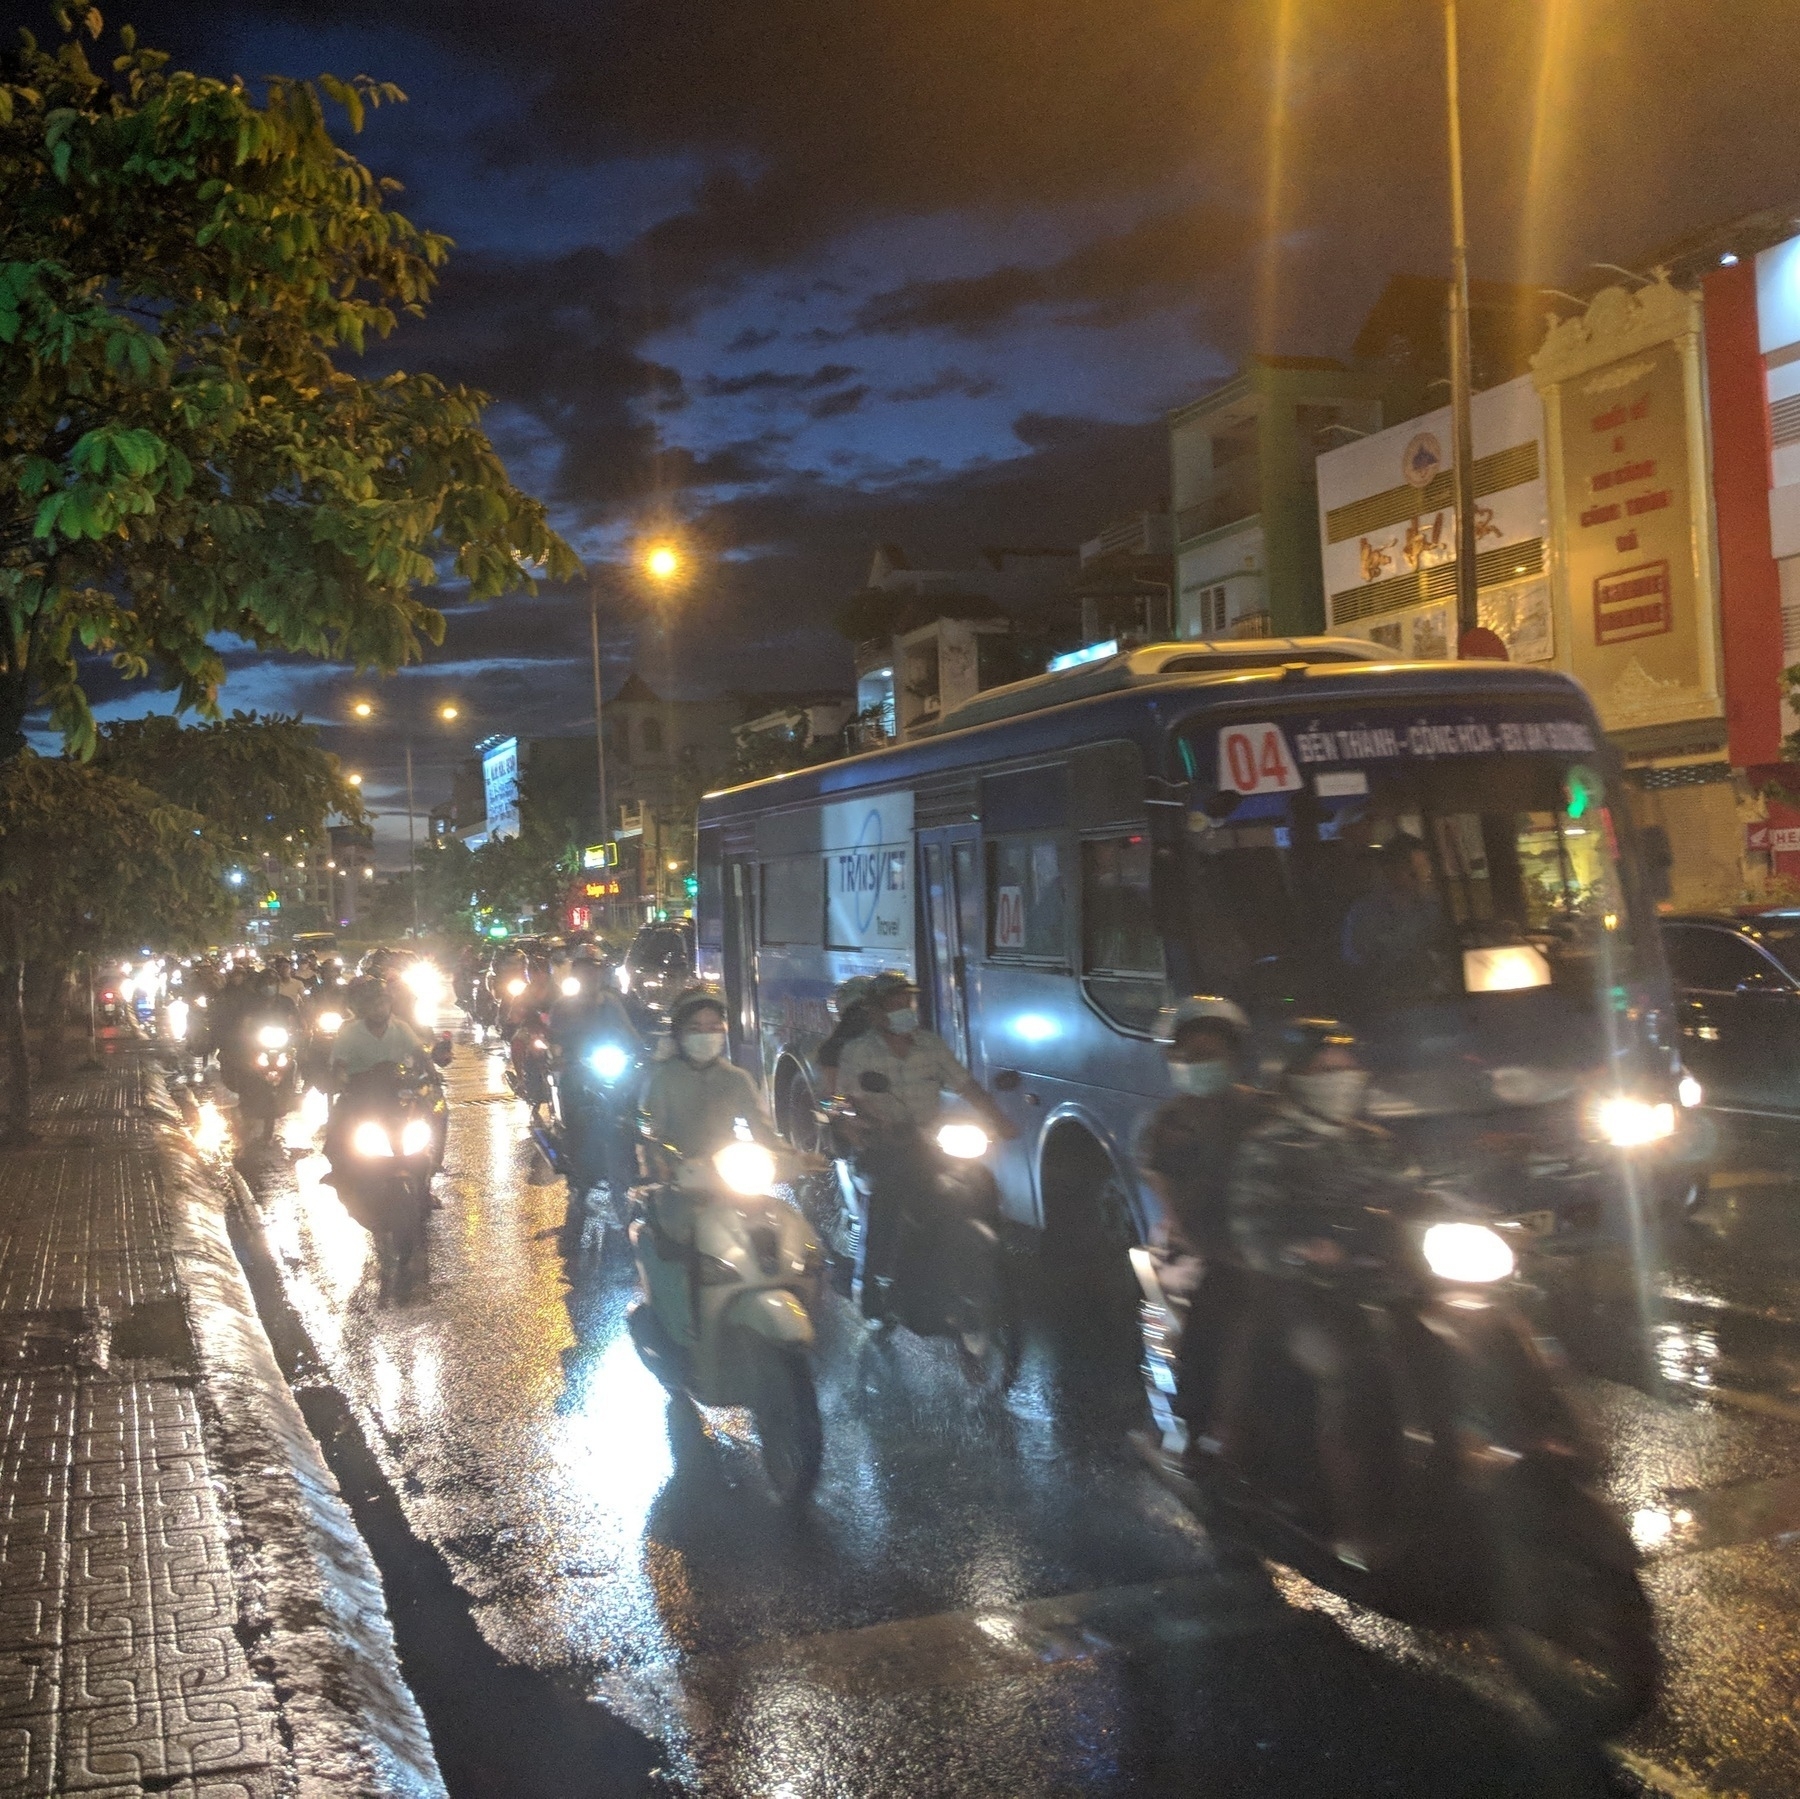 Motorcycles and scooter travelling along a road at night, with a bus travelling behind them. Head-lights and the streetlights are flaring.